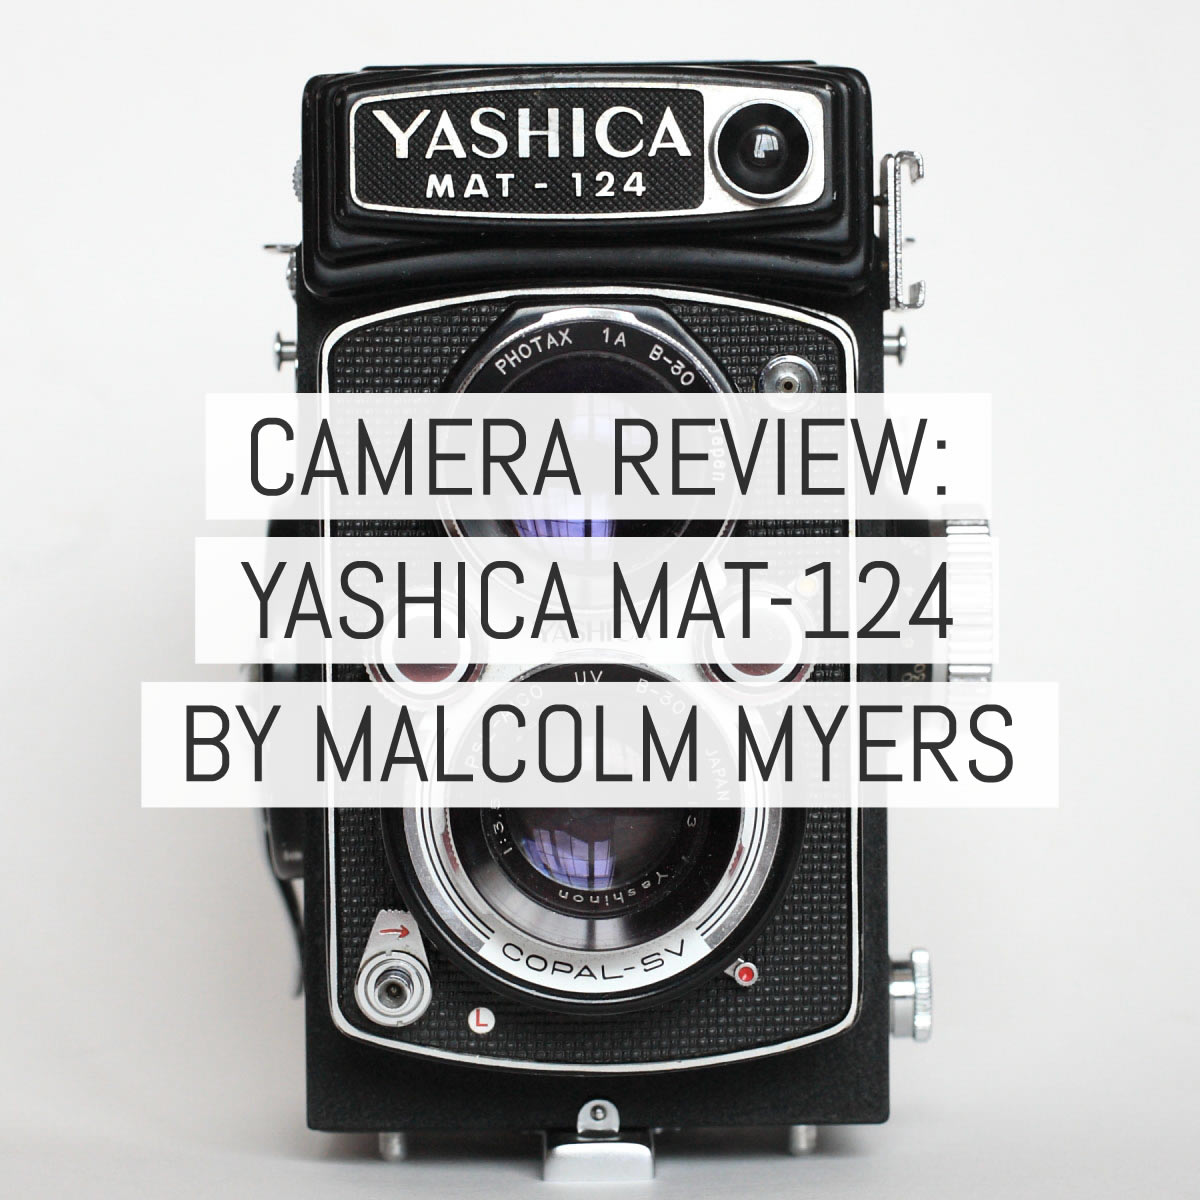 Cover - Review - Yashica Mat-124 - Malcolm Myers